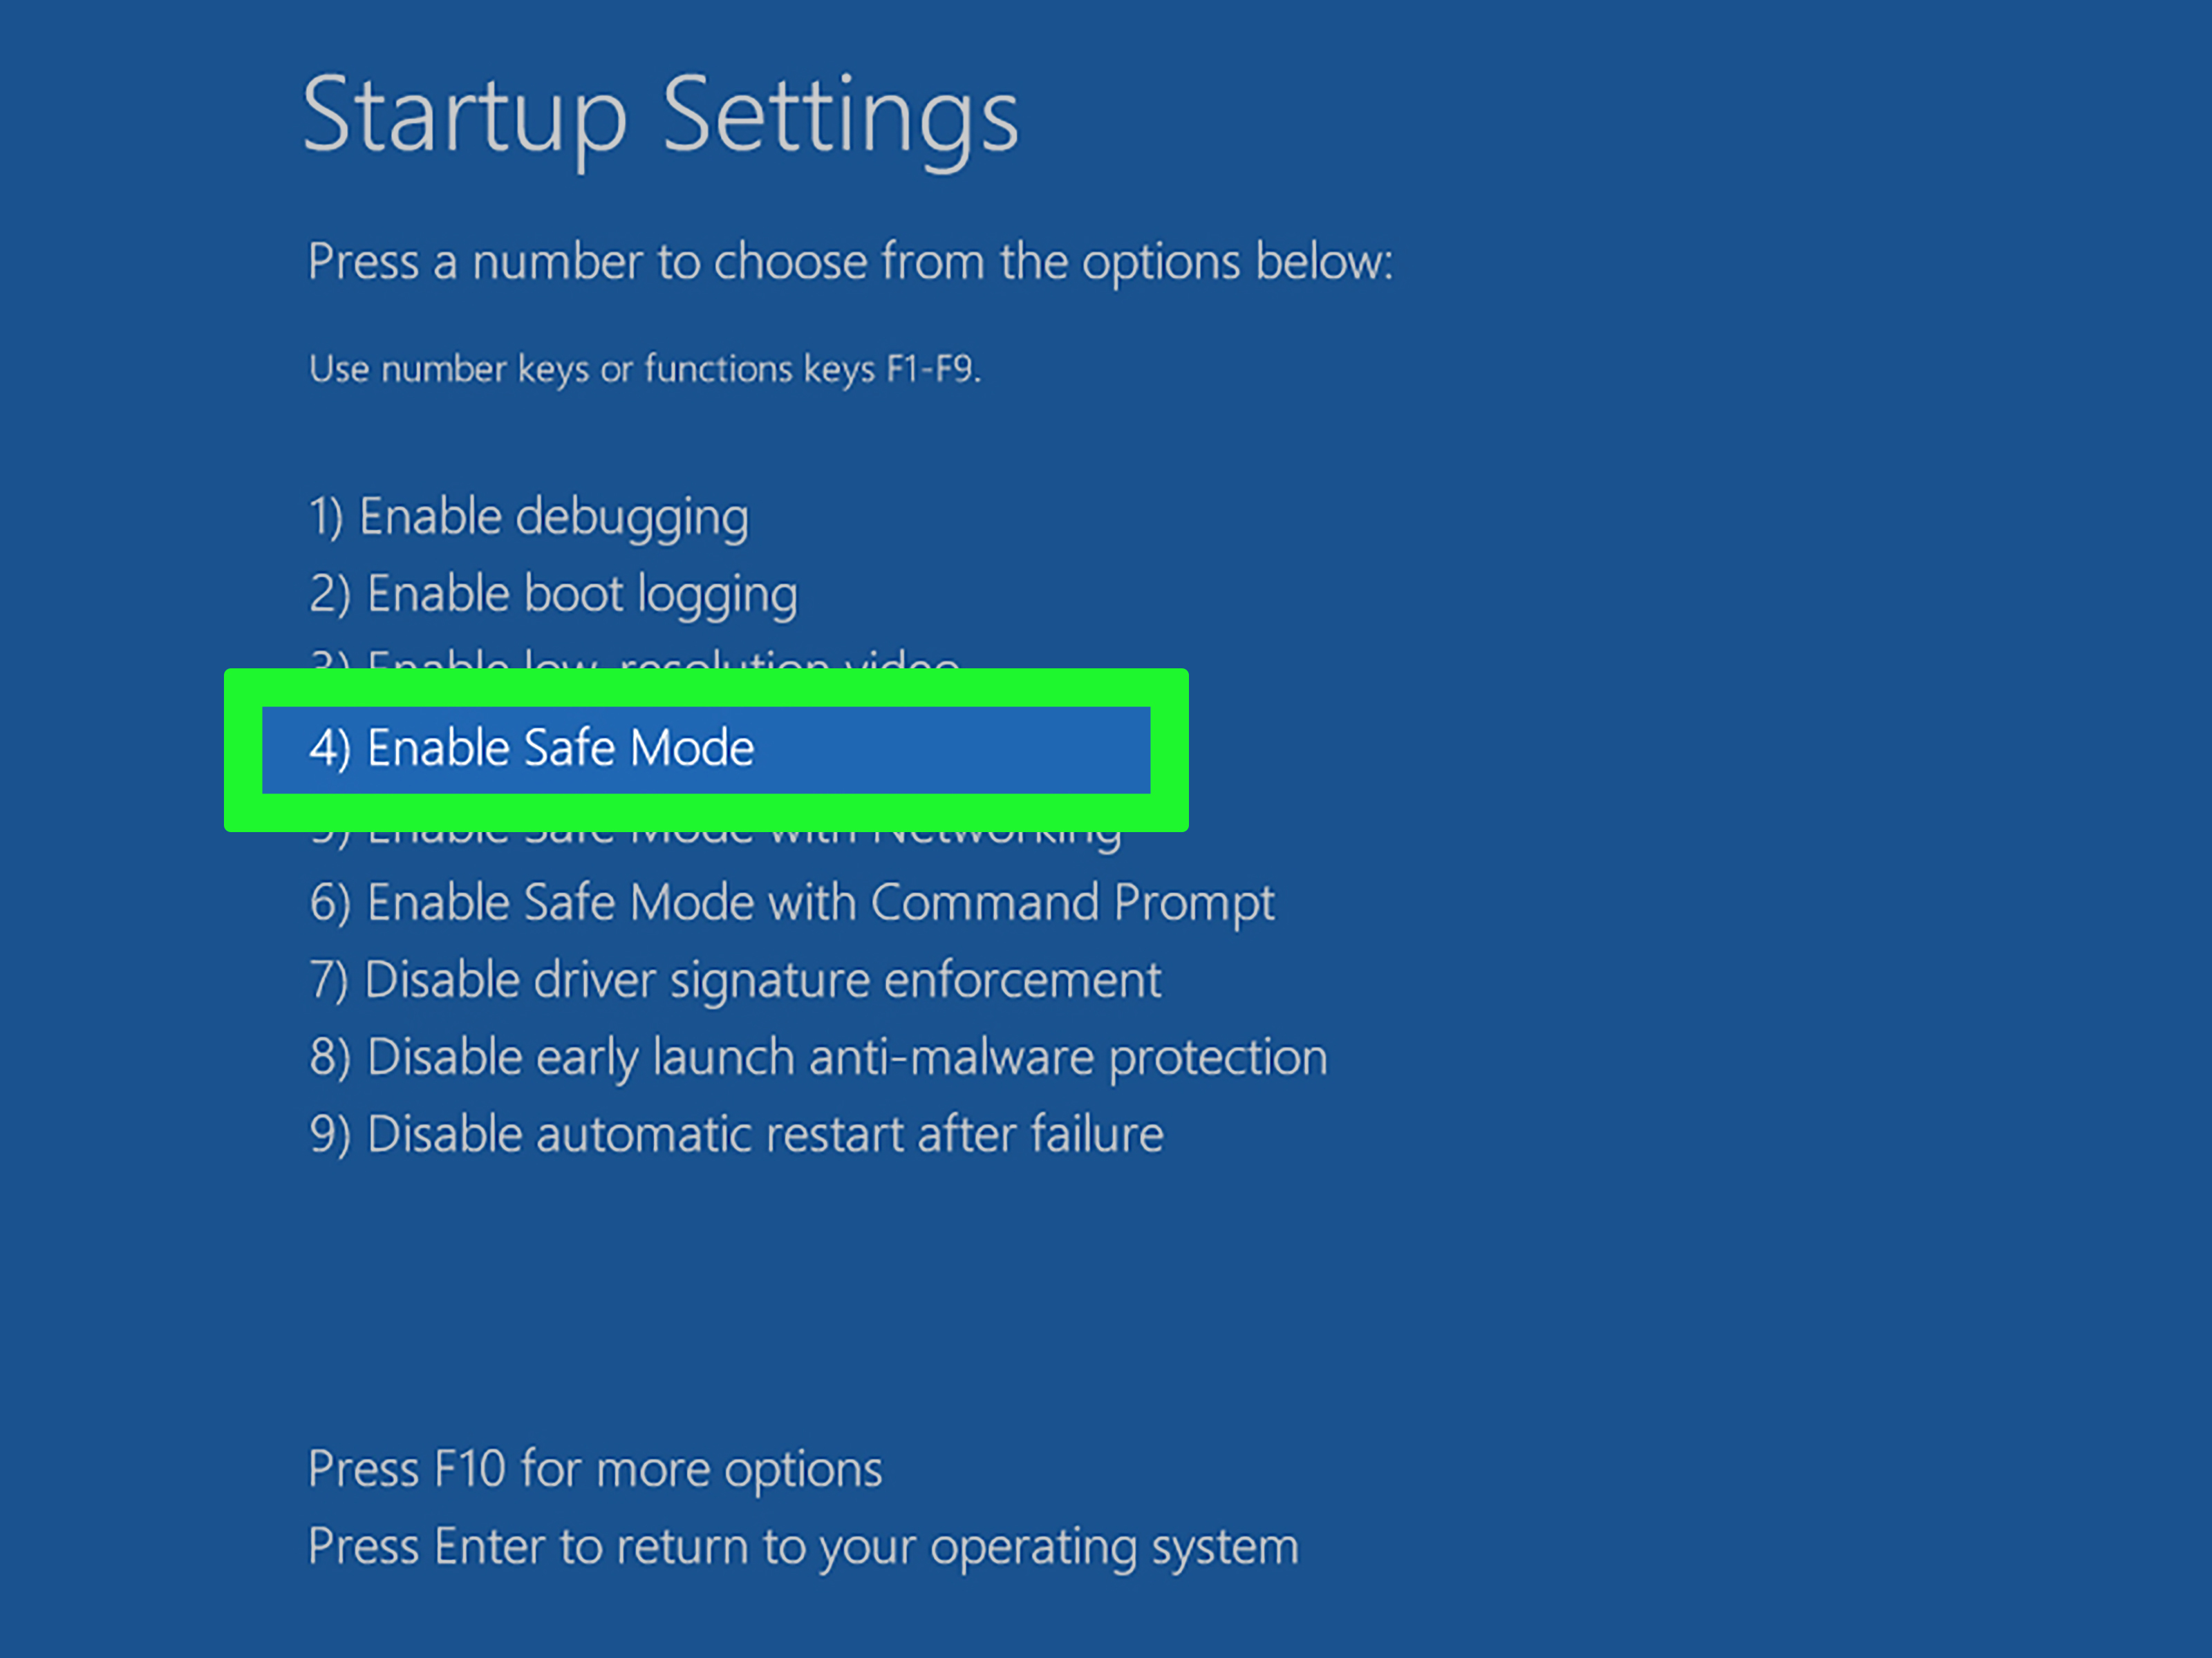 Select Startup Settings and click Restart
Press 4 or F4 to enable Safe Mode